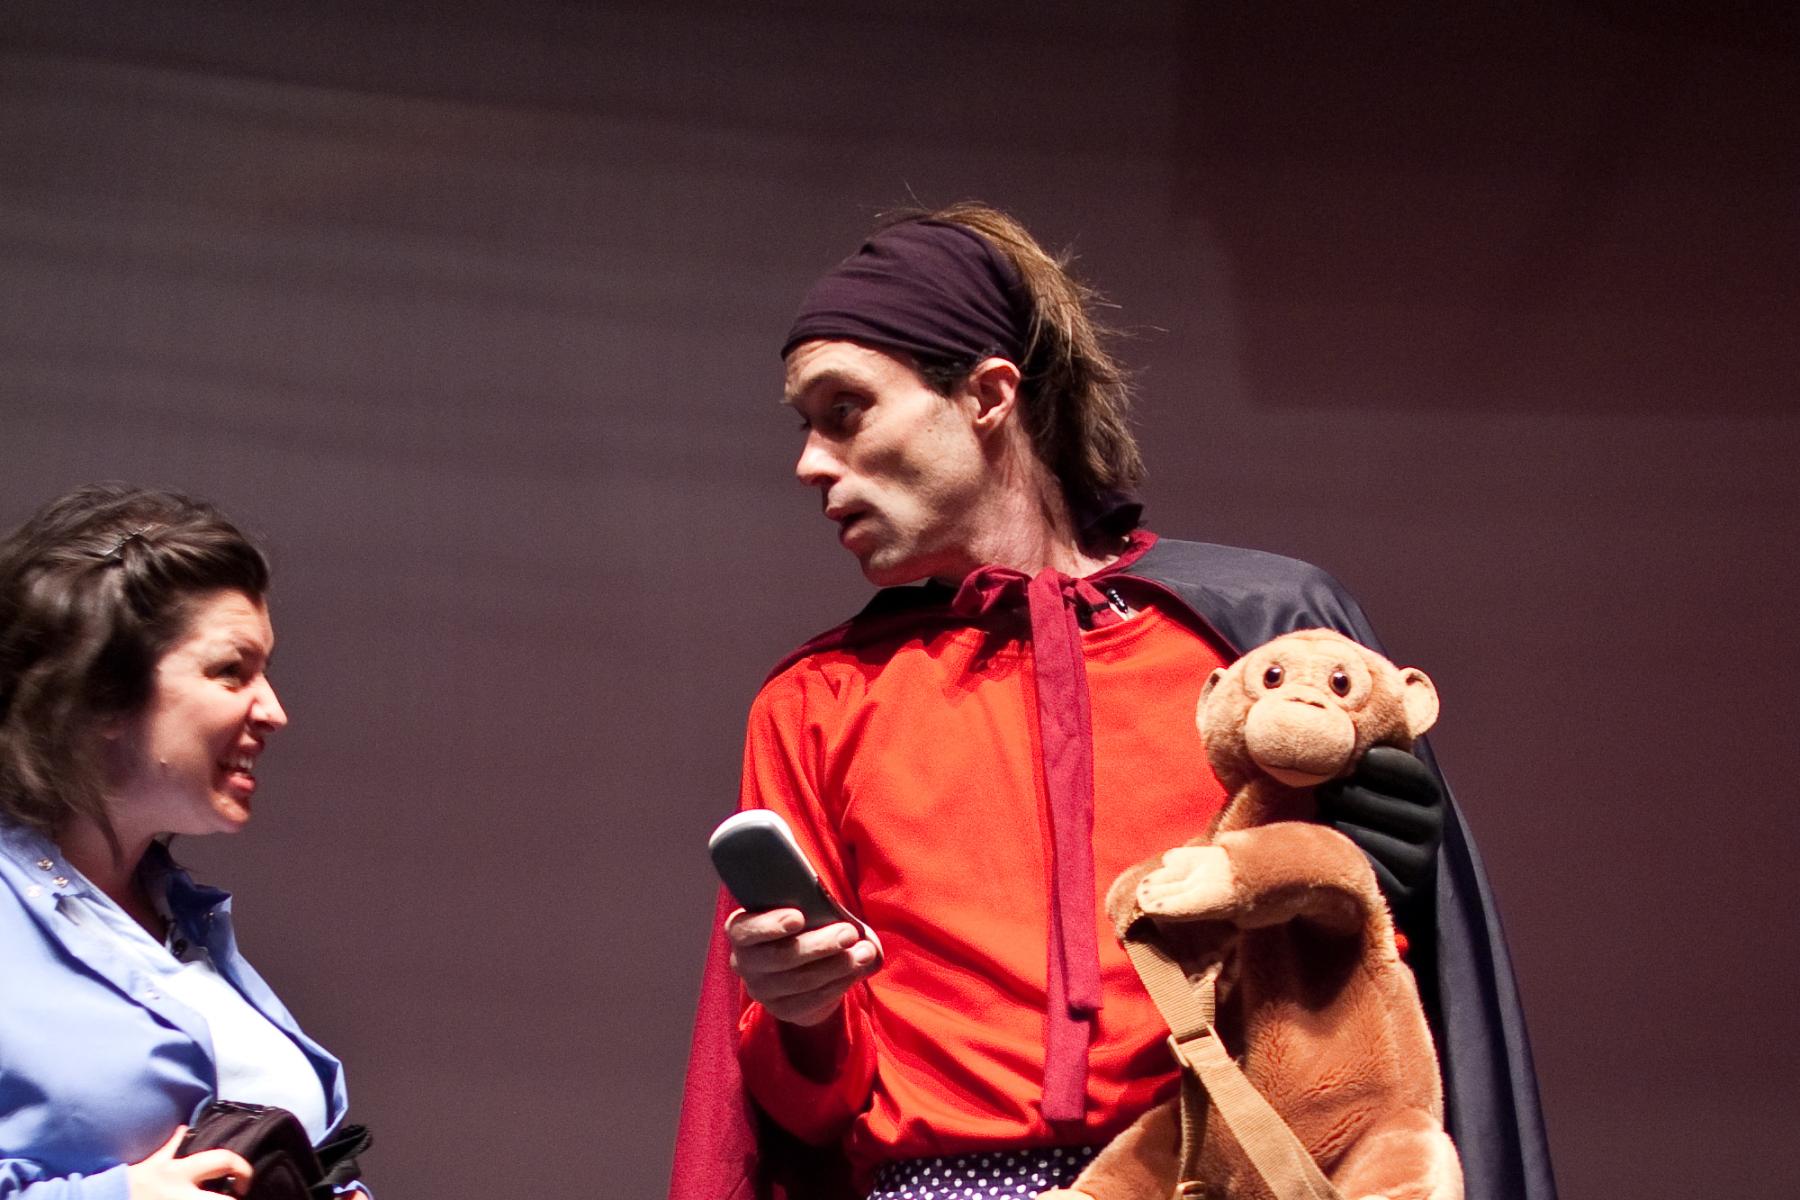 Actors in Attack of the Nanoscientists stage show dressed in superhero outfit with stuffed monkey toy